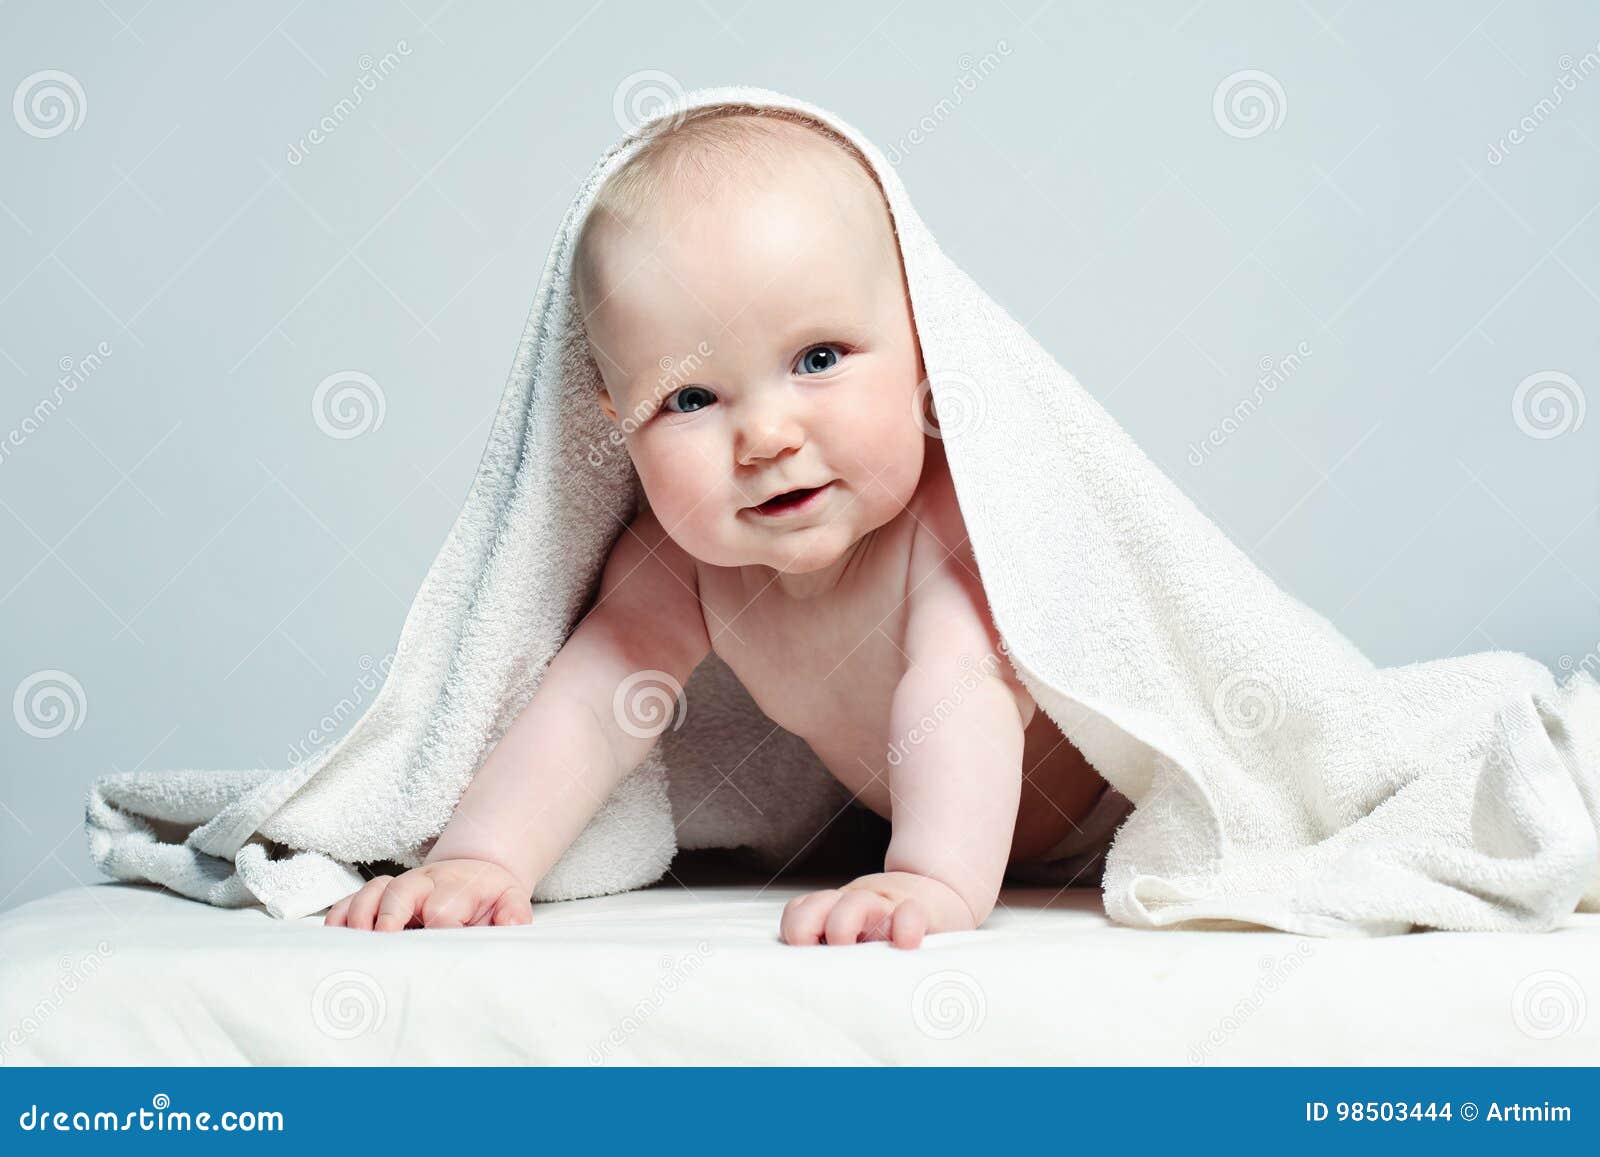 Happy Baby In White Towel On Background Stock Photo Image Of